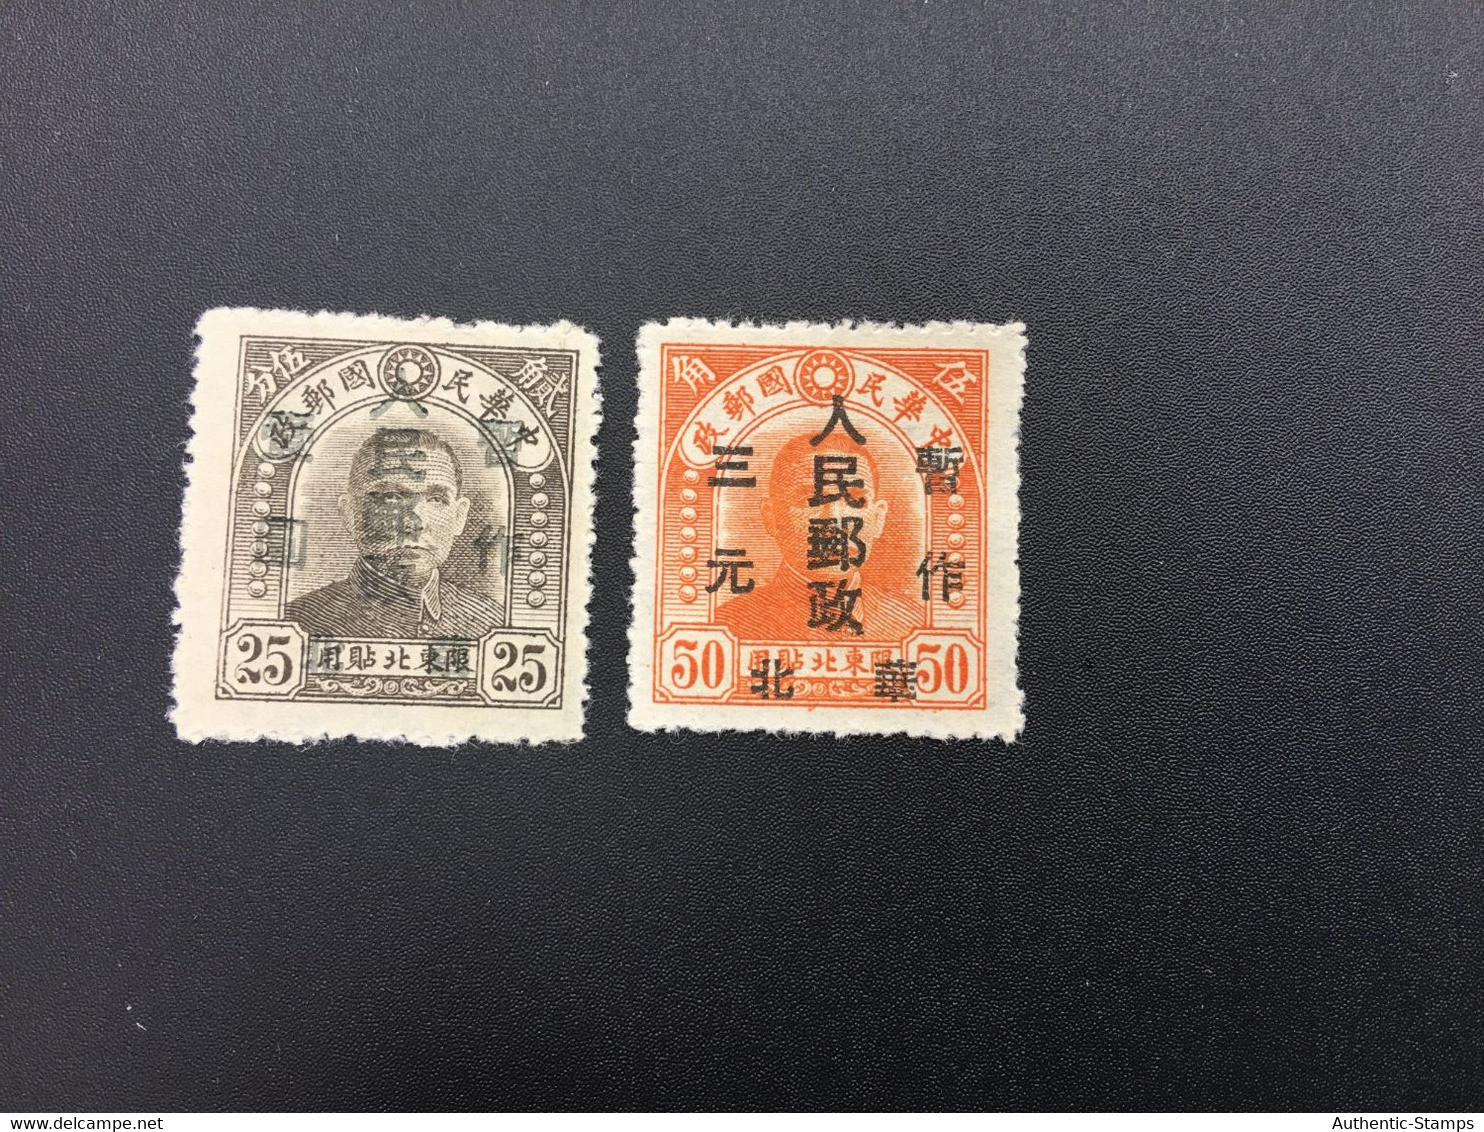 CHINA STAMP, SET, LIBERATED AREA, UNUSED, TIMBRO, STEMPEL, CINA, CHINE, LIST 6326 - Noord-China 1949-50